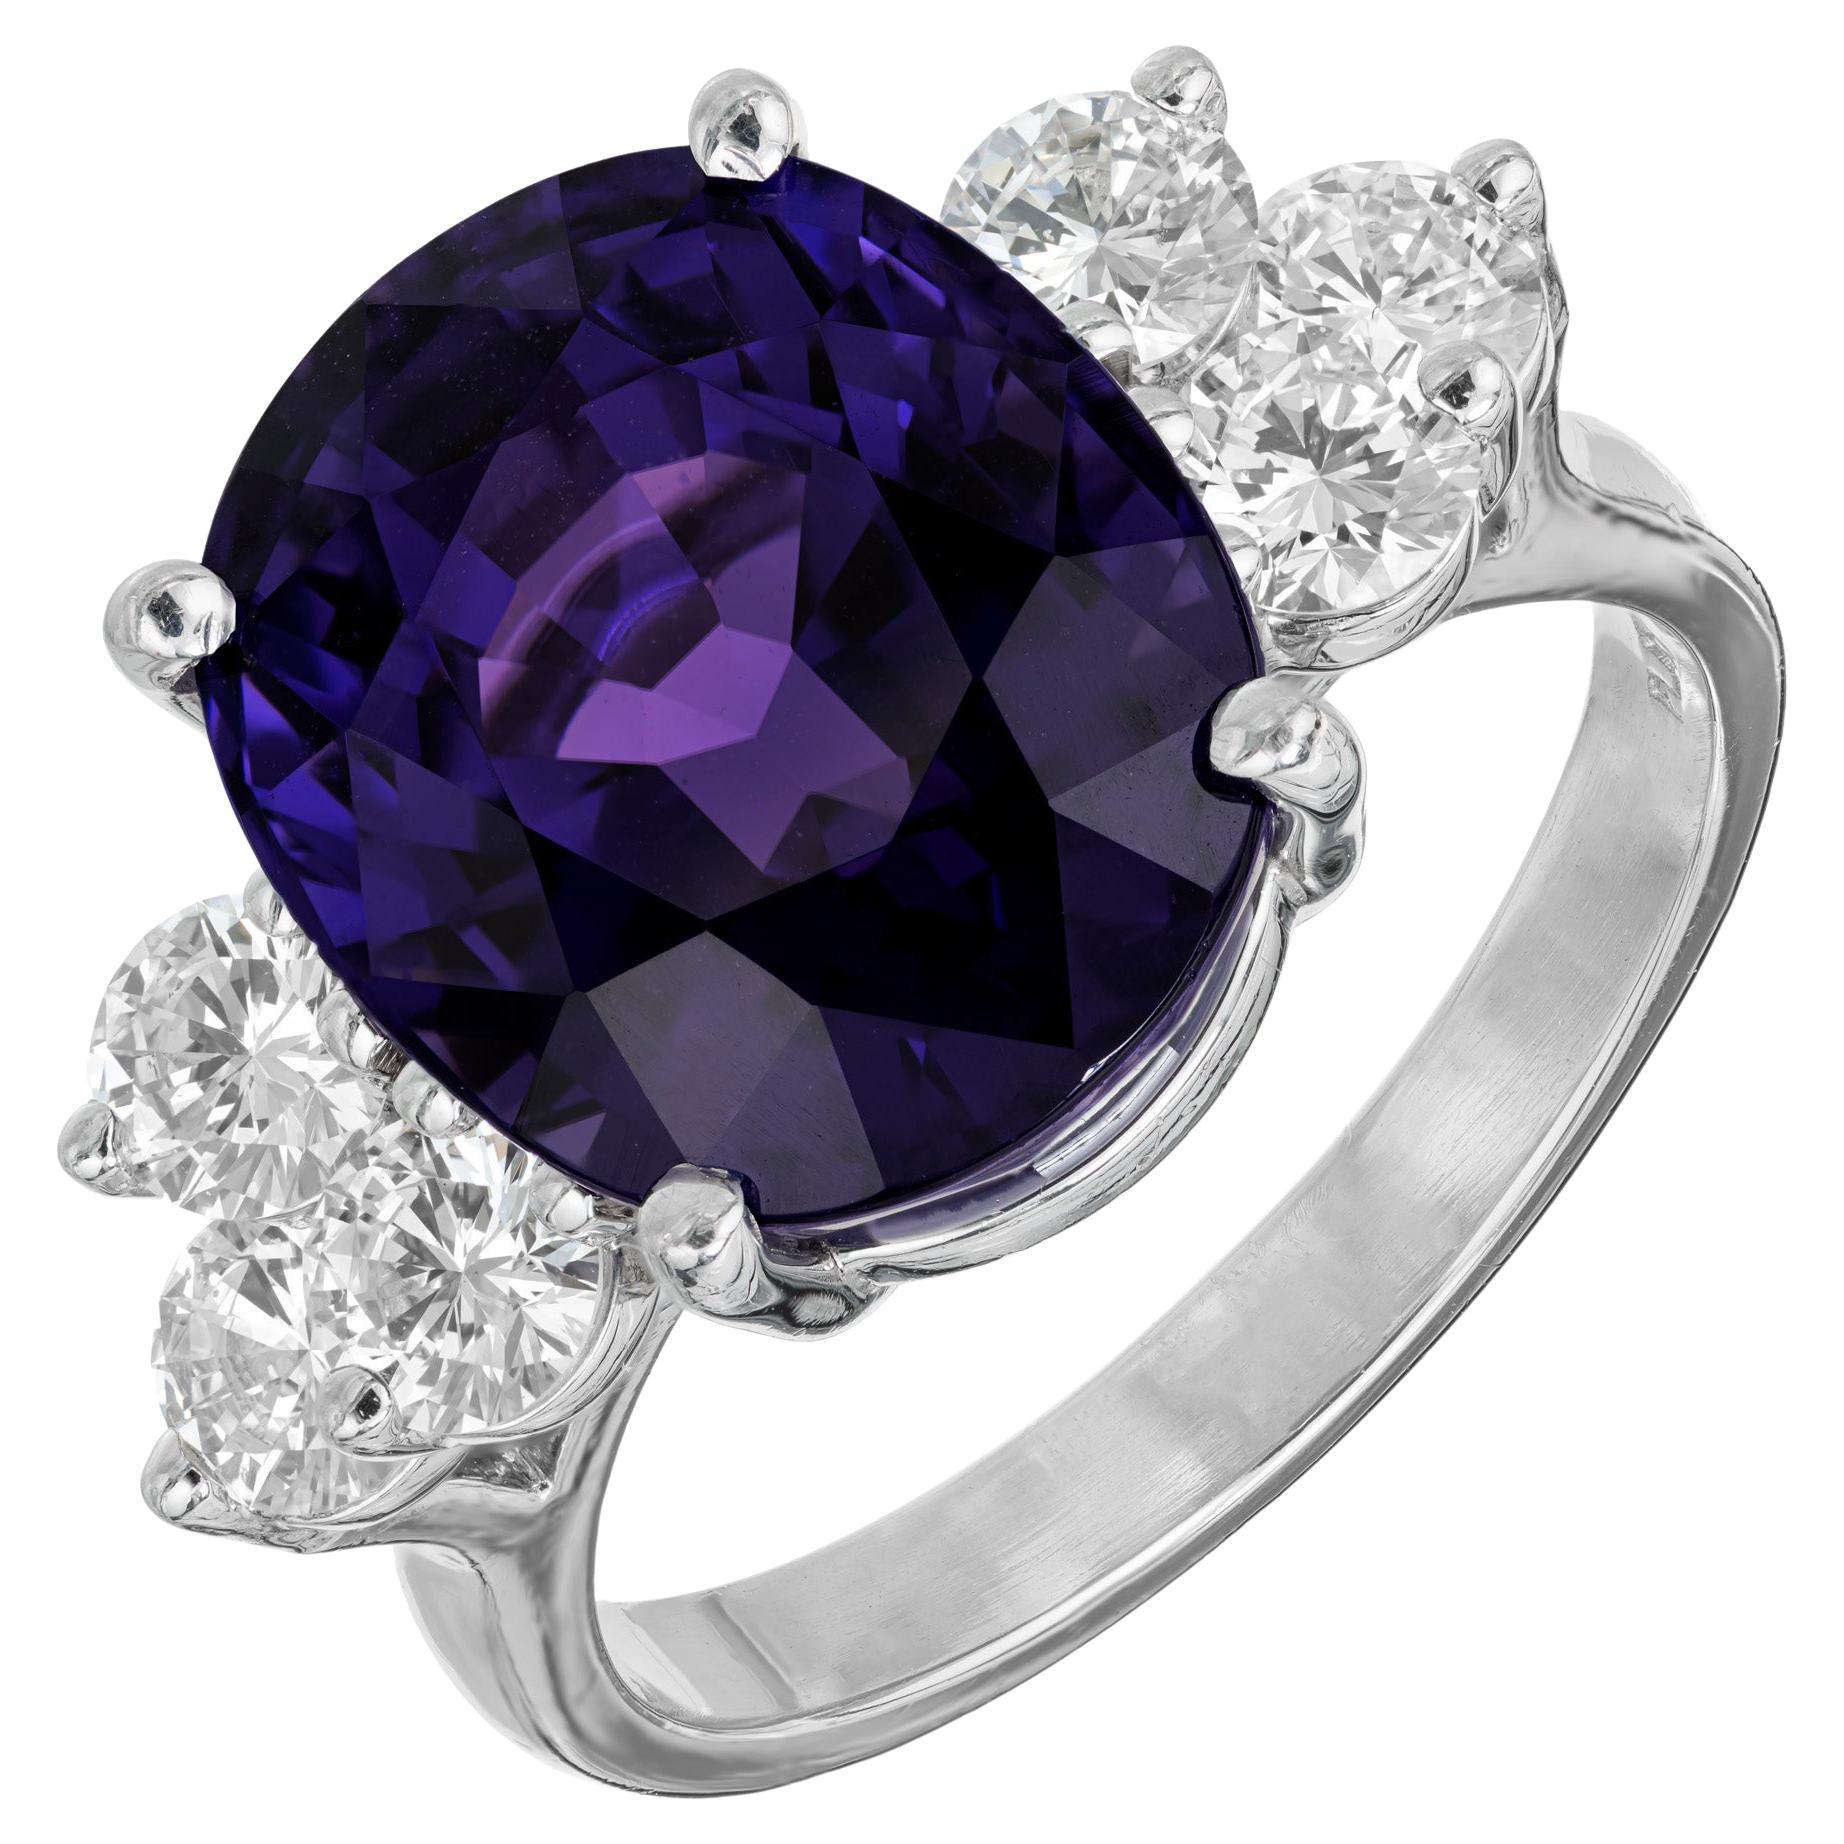 Blue-Purple color change sapphire and diamonds engagement ring. AGTA certified 12.67ct oval center sapphire set in platinum with 3 round accent diamonds on each side. Natural color change, Certified natural, no heat. Crafted in the Peter Suchy